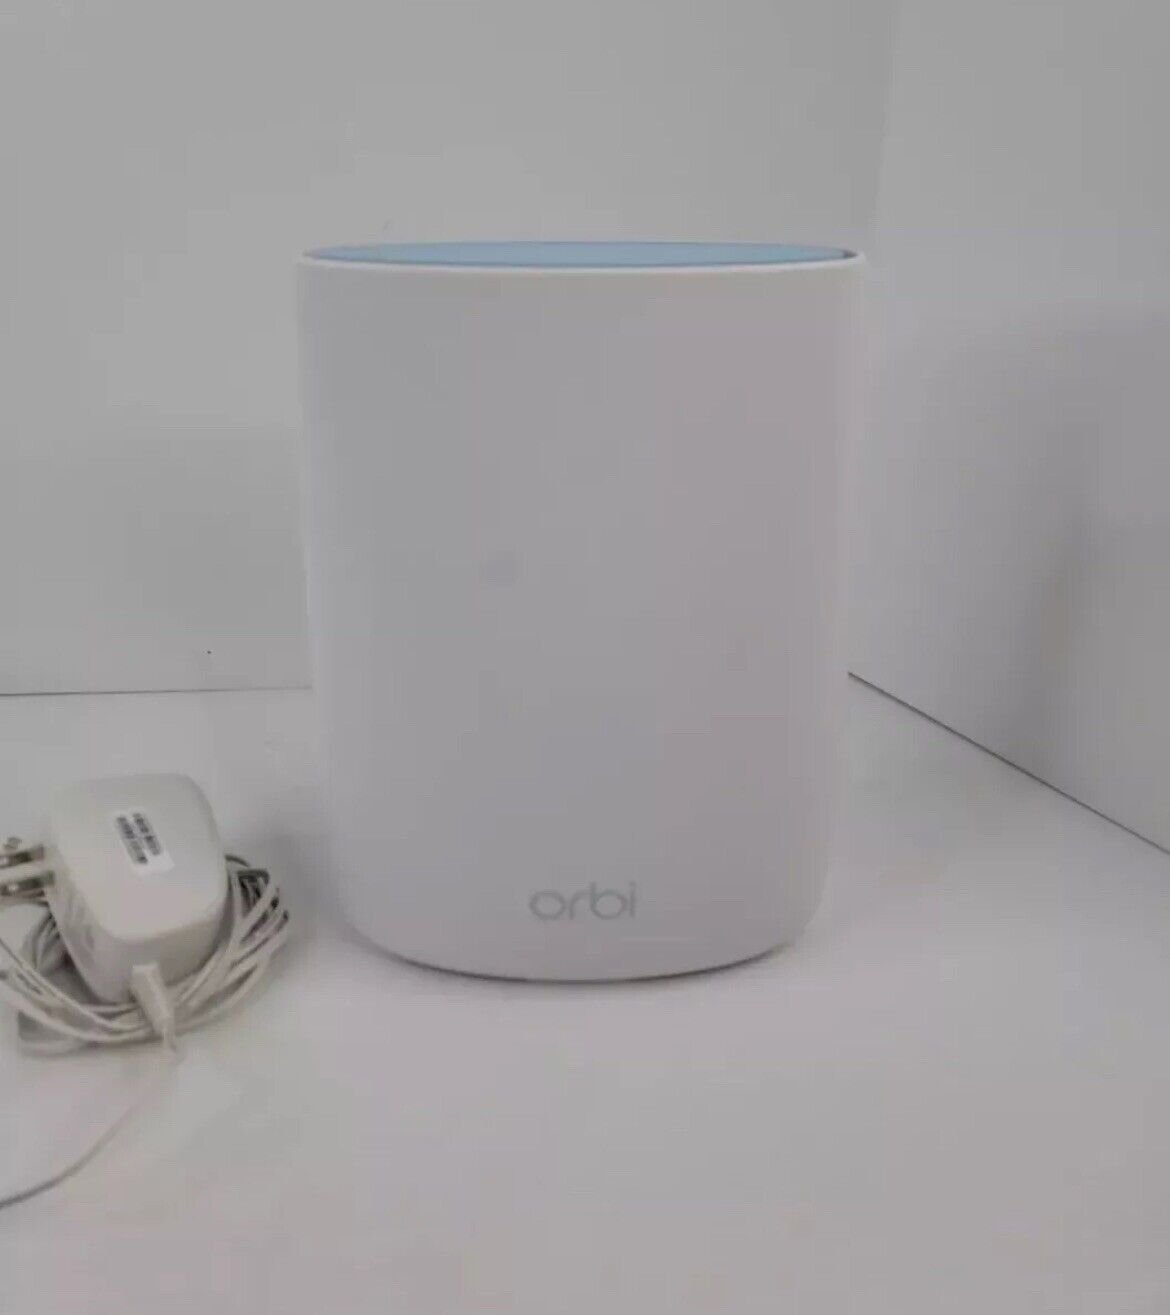 NETGEAR Orbi LBR20 4G LTE Router AC2200 WIFI (up to 2.2gbps)